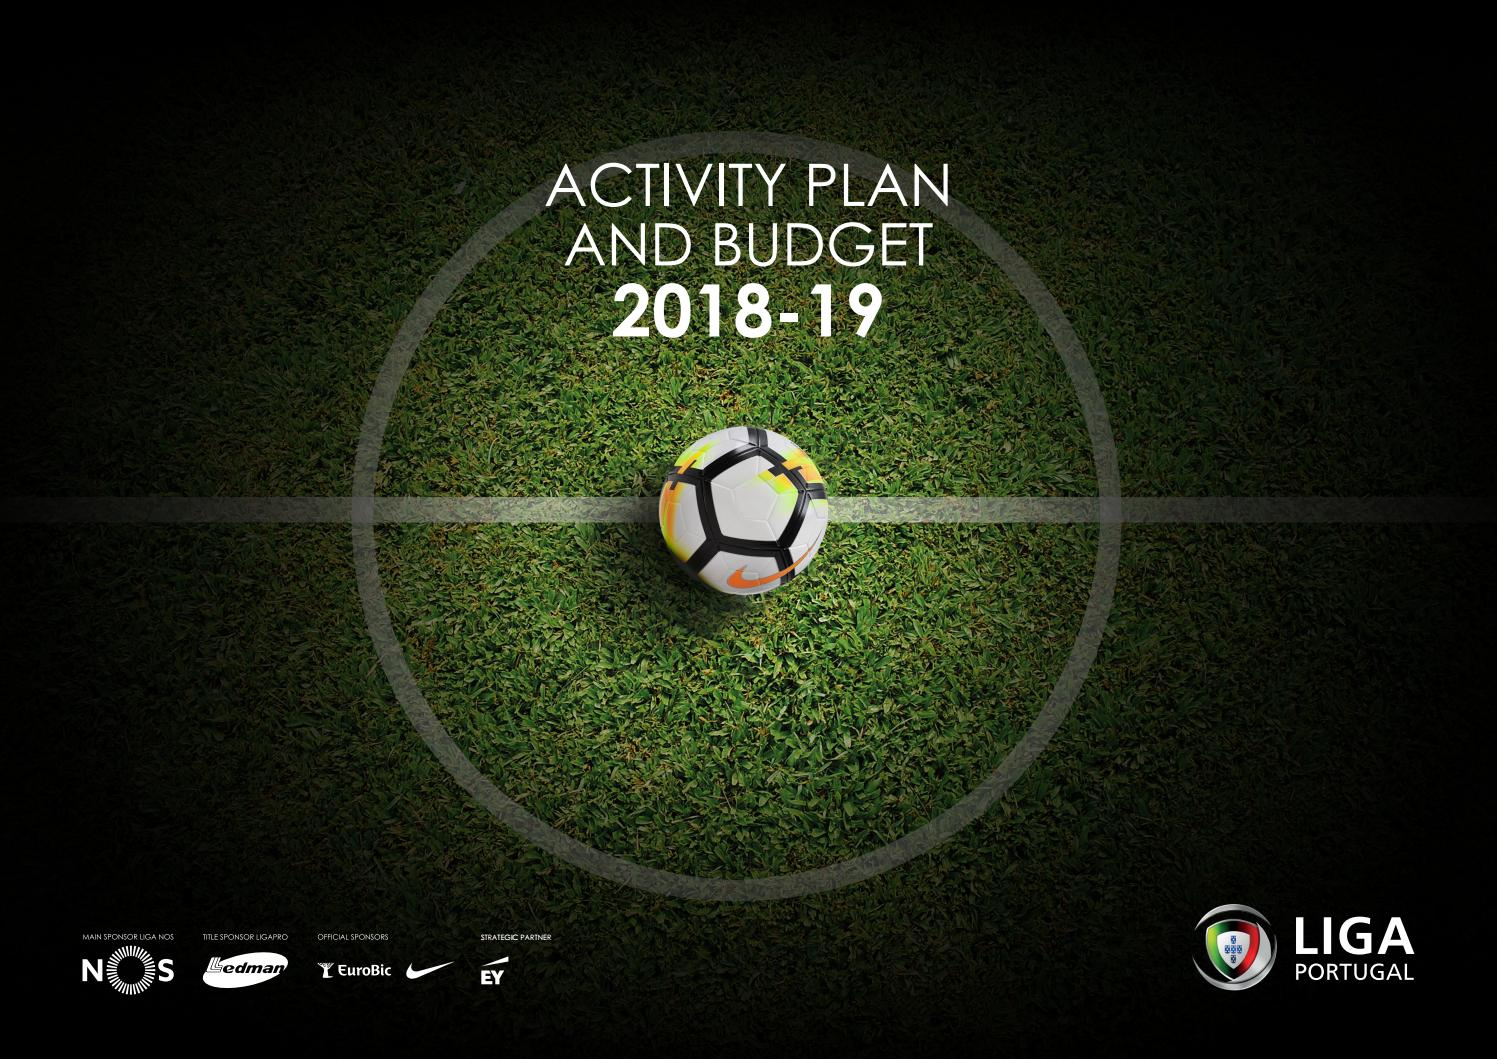 Activity Plan and Budget 11-11 by Liga Portugal - issuu With Regard To Youth Football Budget Template Throughout Youth Football Budget Template